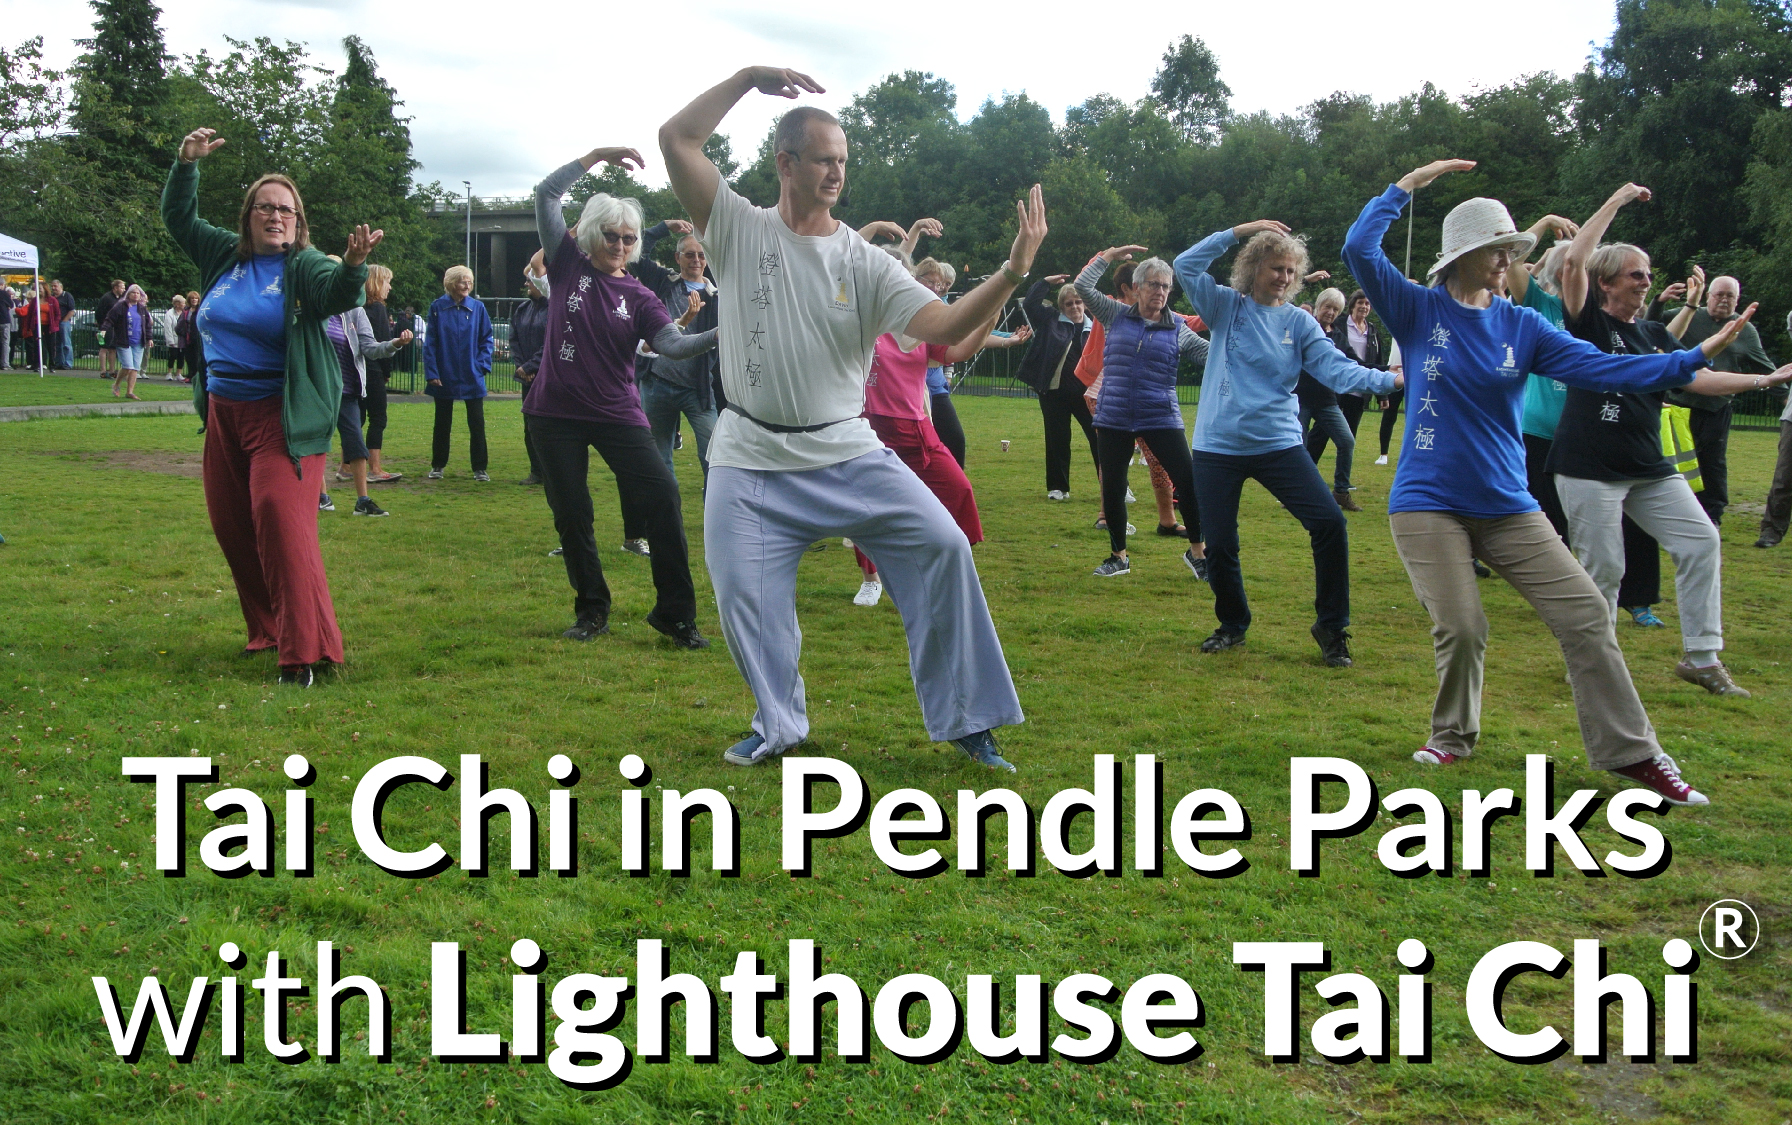 Summer Tai Chi in the Park returns